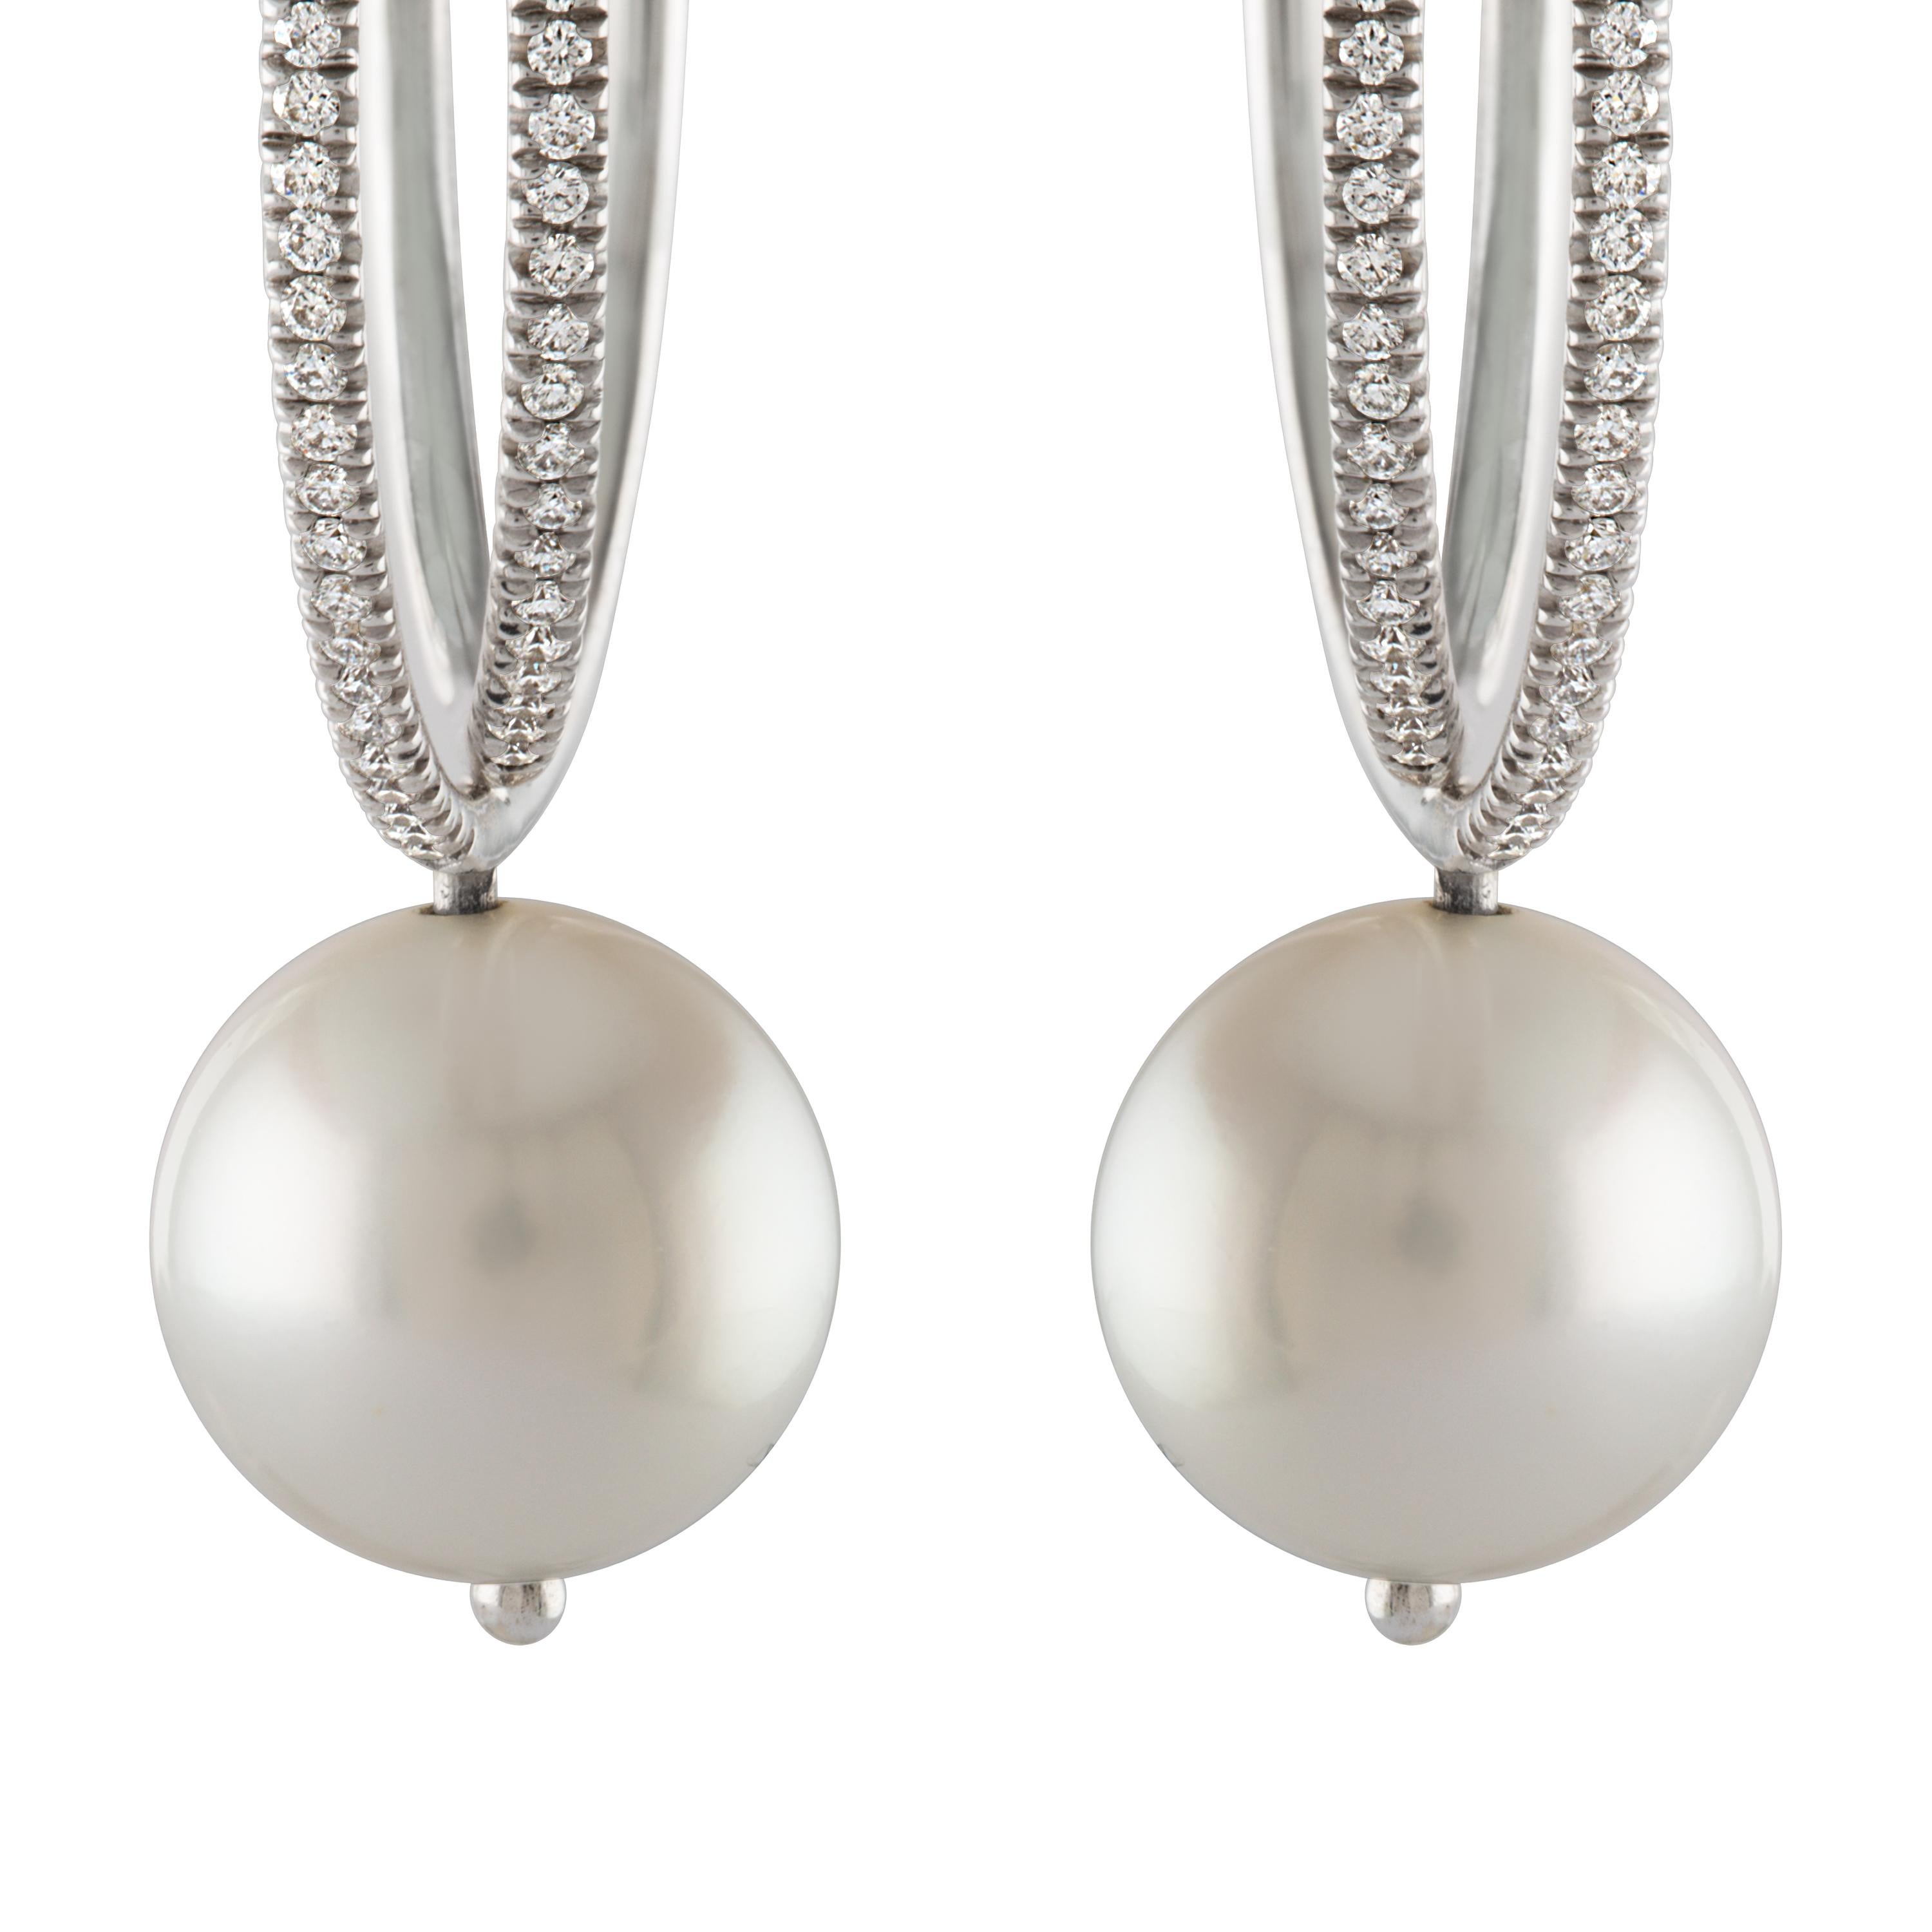 These earrings consist of South Sea white round cultured pearls hanging from 14 karat white gold diamond double hoops. 
The pearls measure 11.4mm and the interlocking hoops have 0.62 carats of diamonds total.
The pearls have superb luster and very